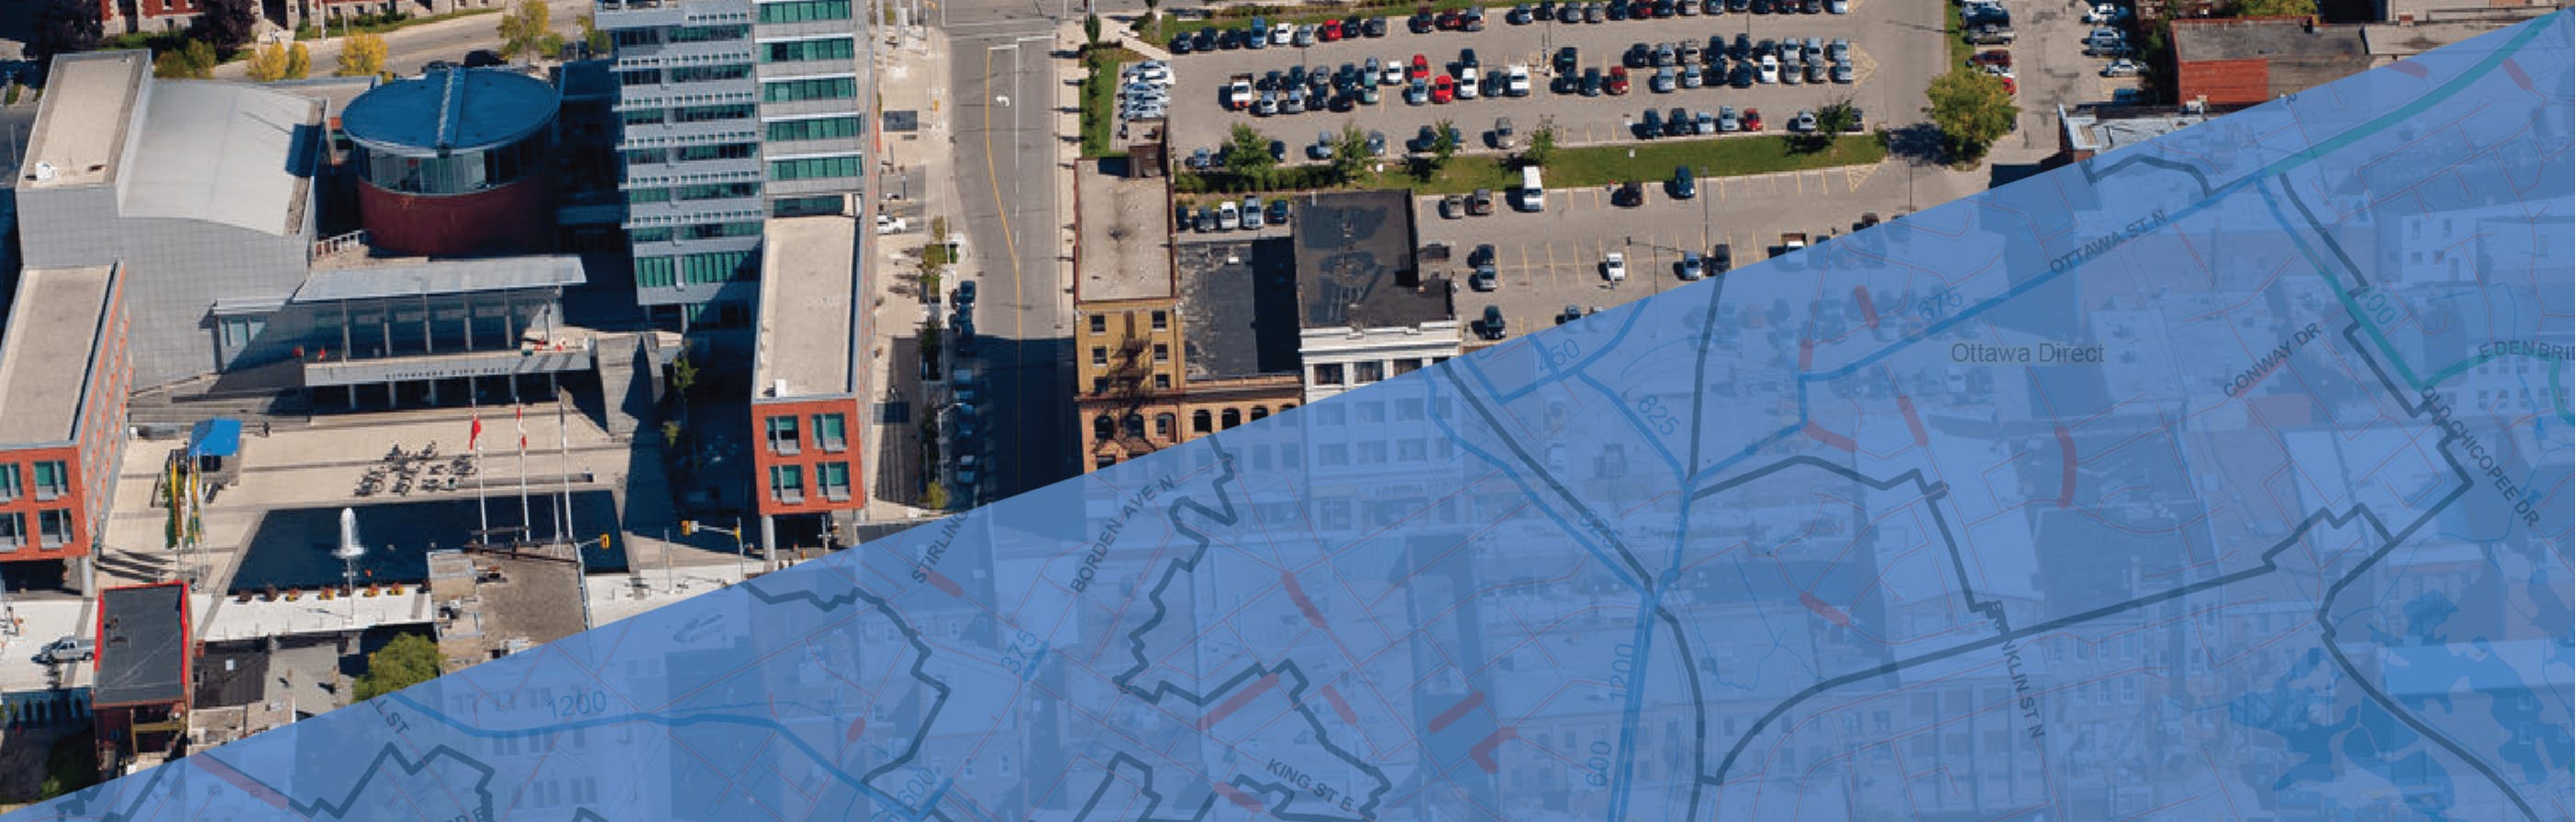 City of Kitchener with sanitary system map overlay